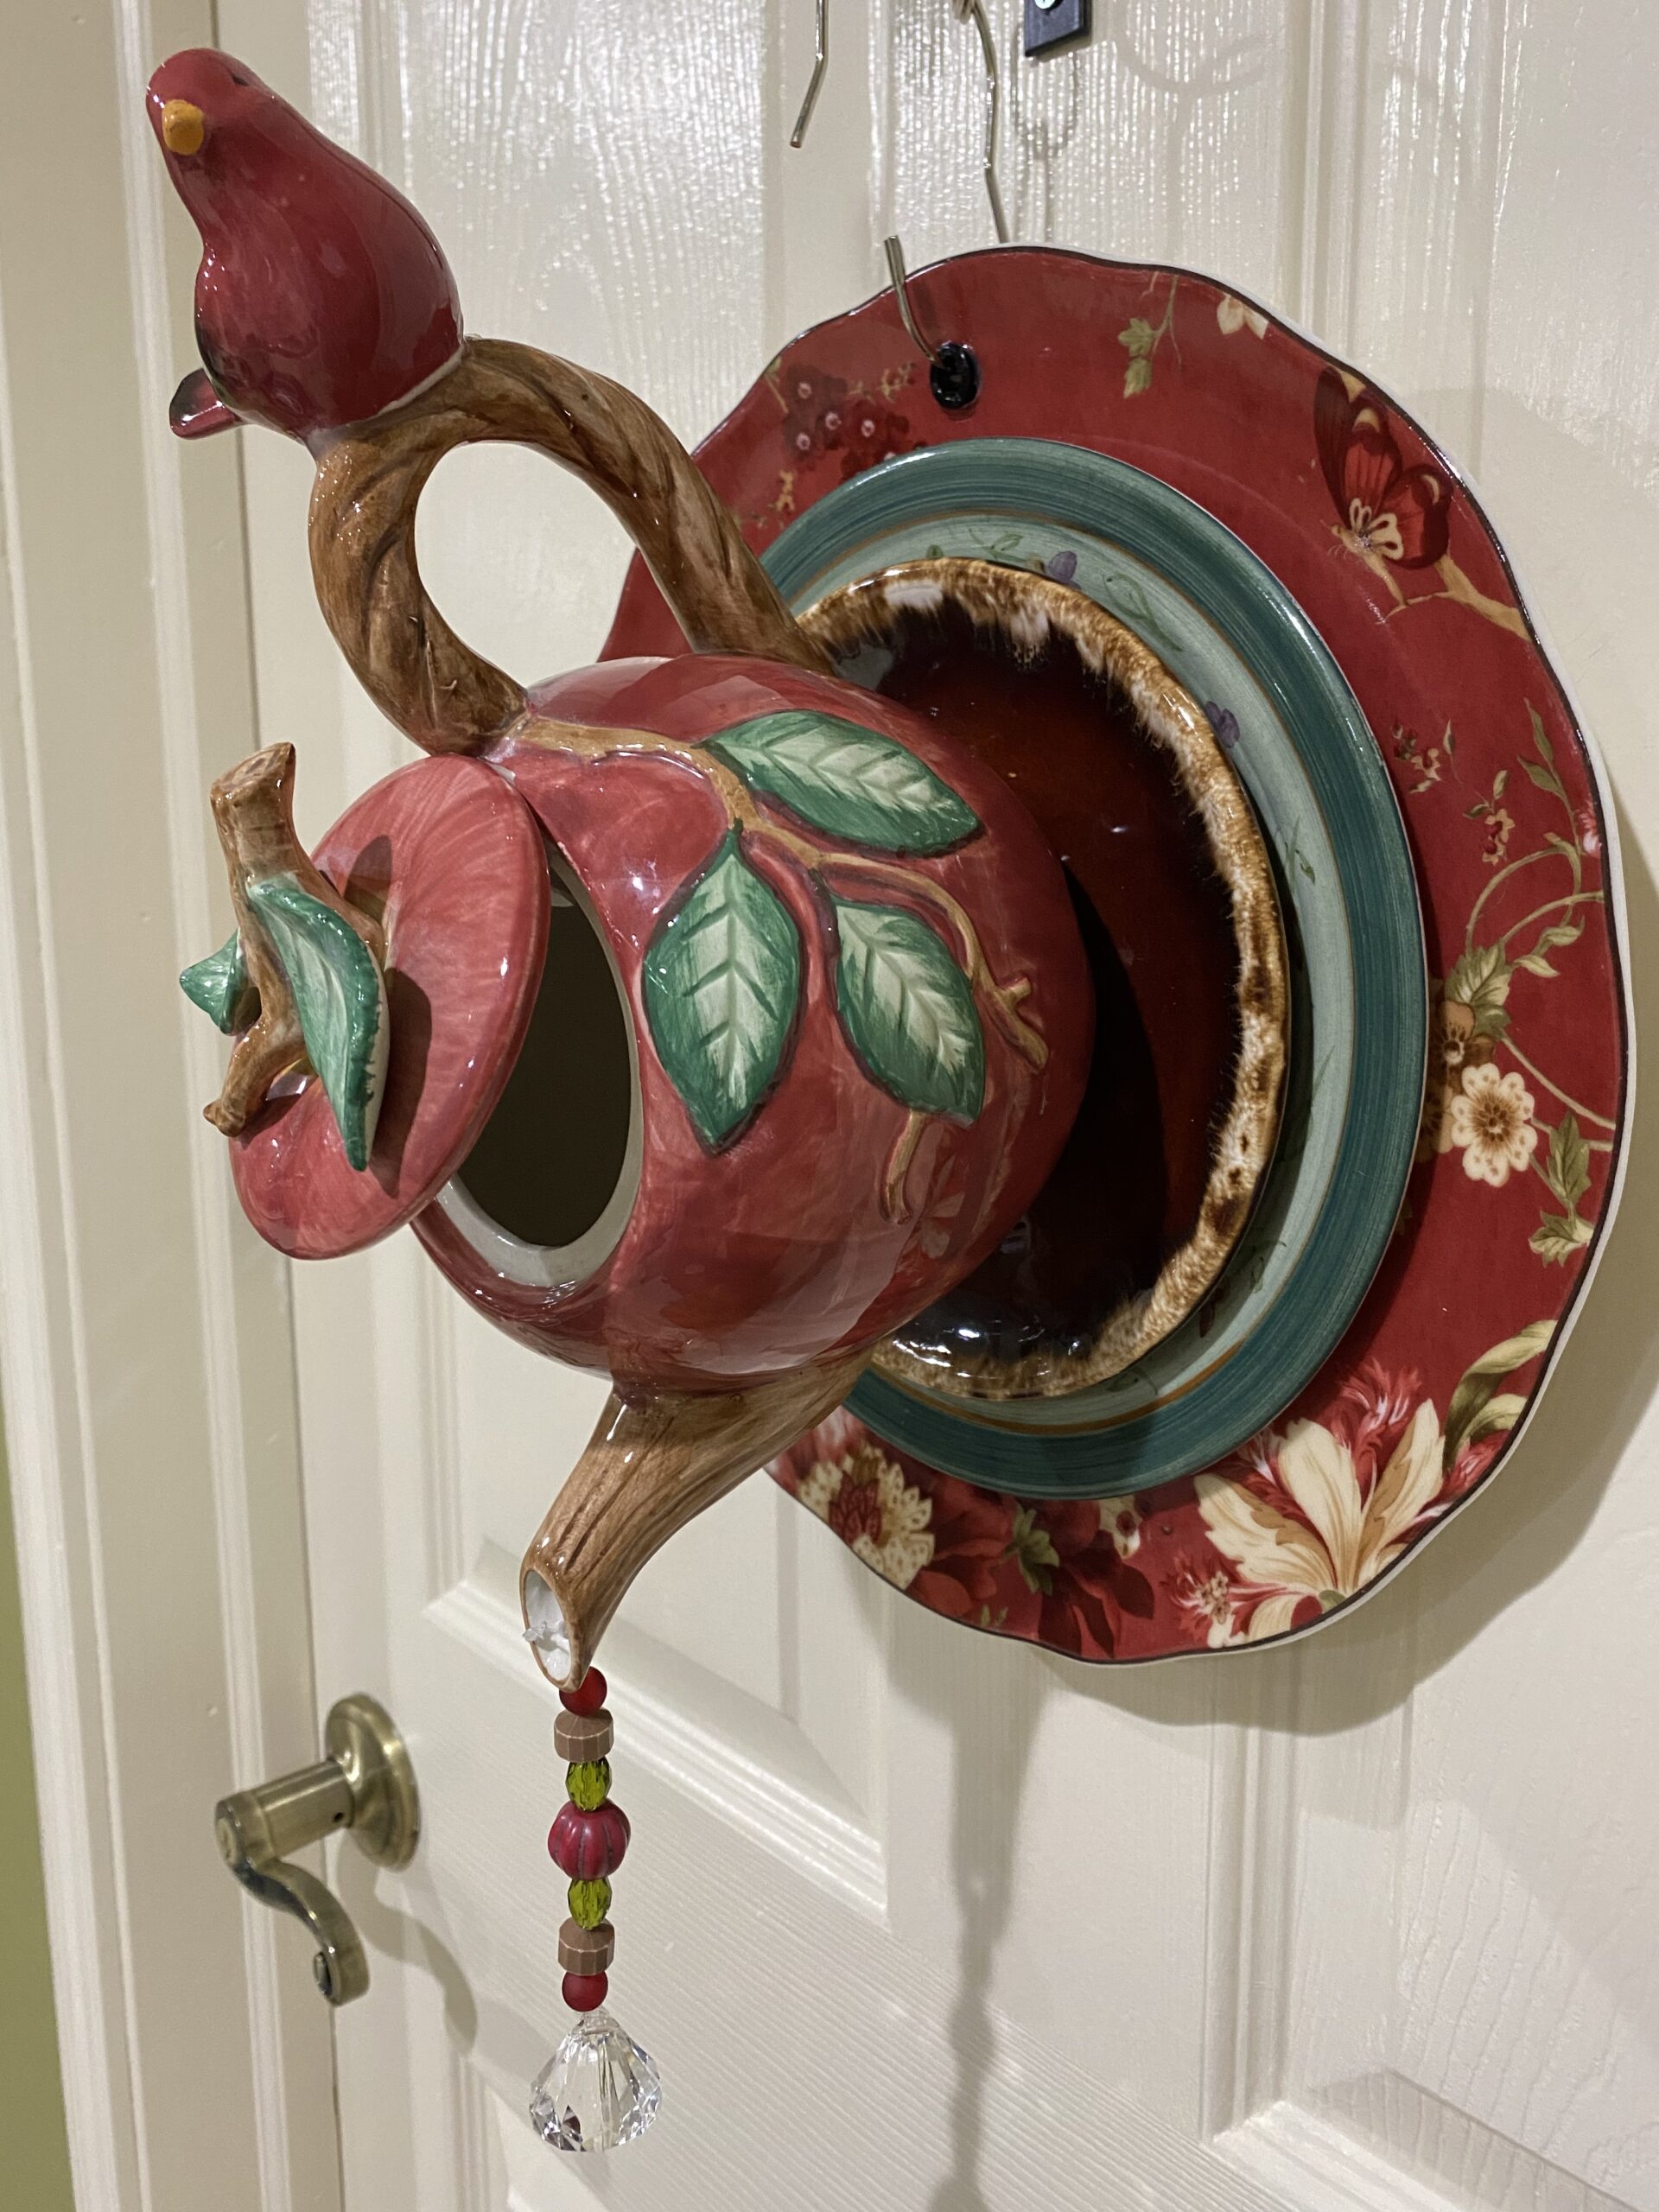 Red teapot now made into garden decoration with cardinal sitting on handle and crystals coming out of the spout.